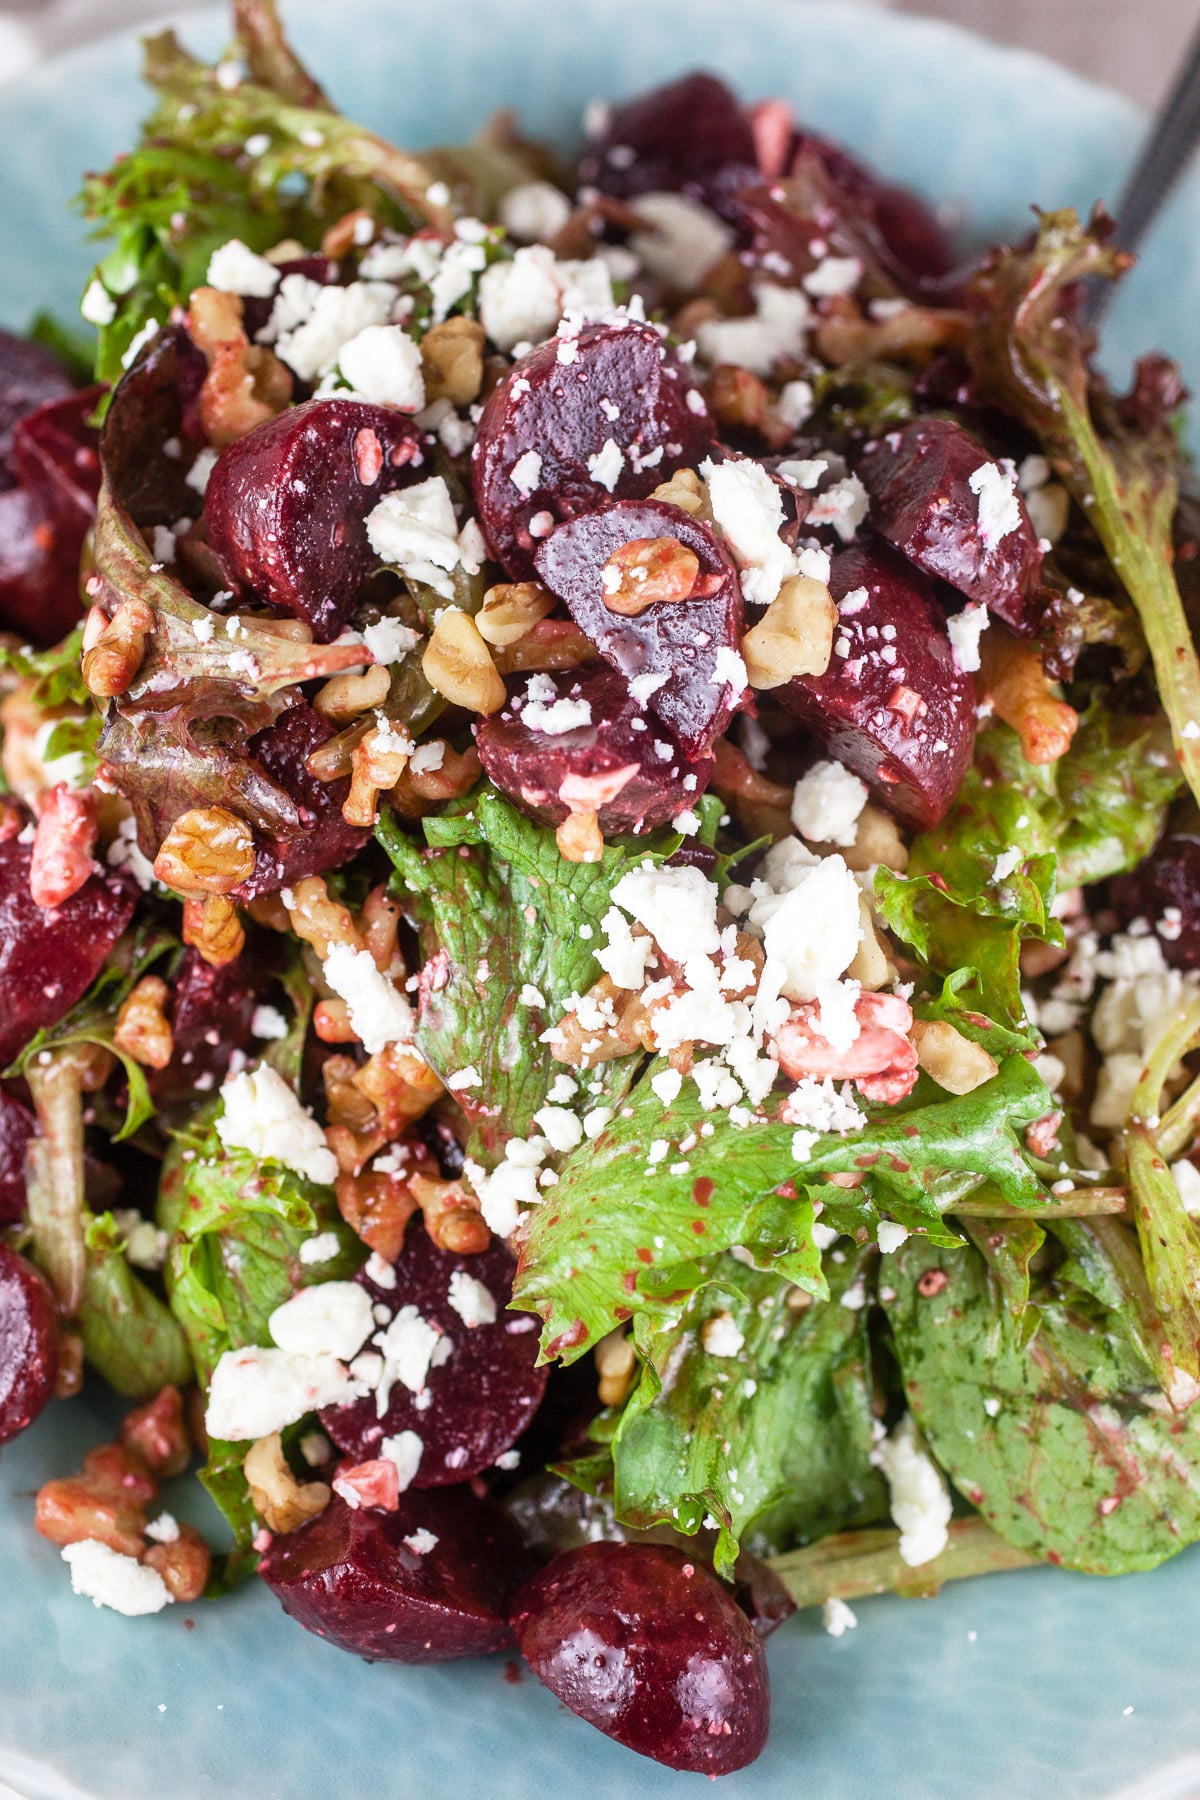 Pickled Beet Salad with Feta and Walnuts | The Rustic Foodie®